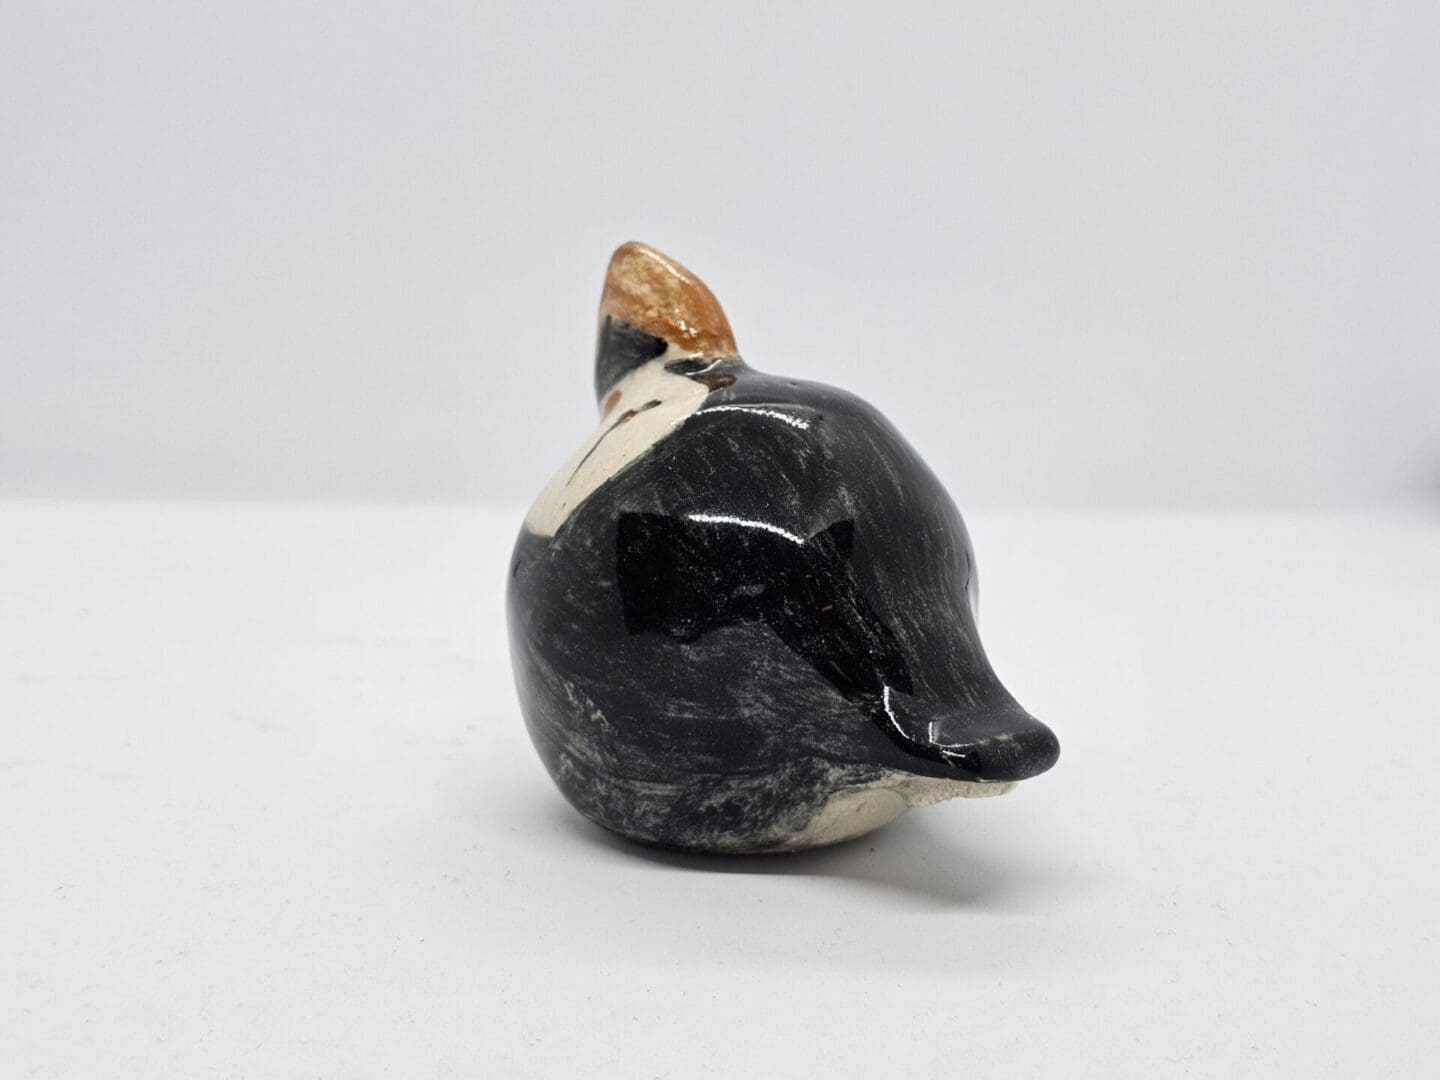 On a white background, a rear-left facing view of a ceramic puffin